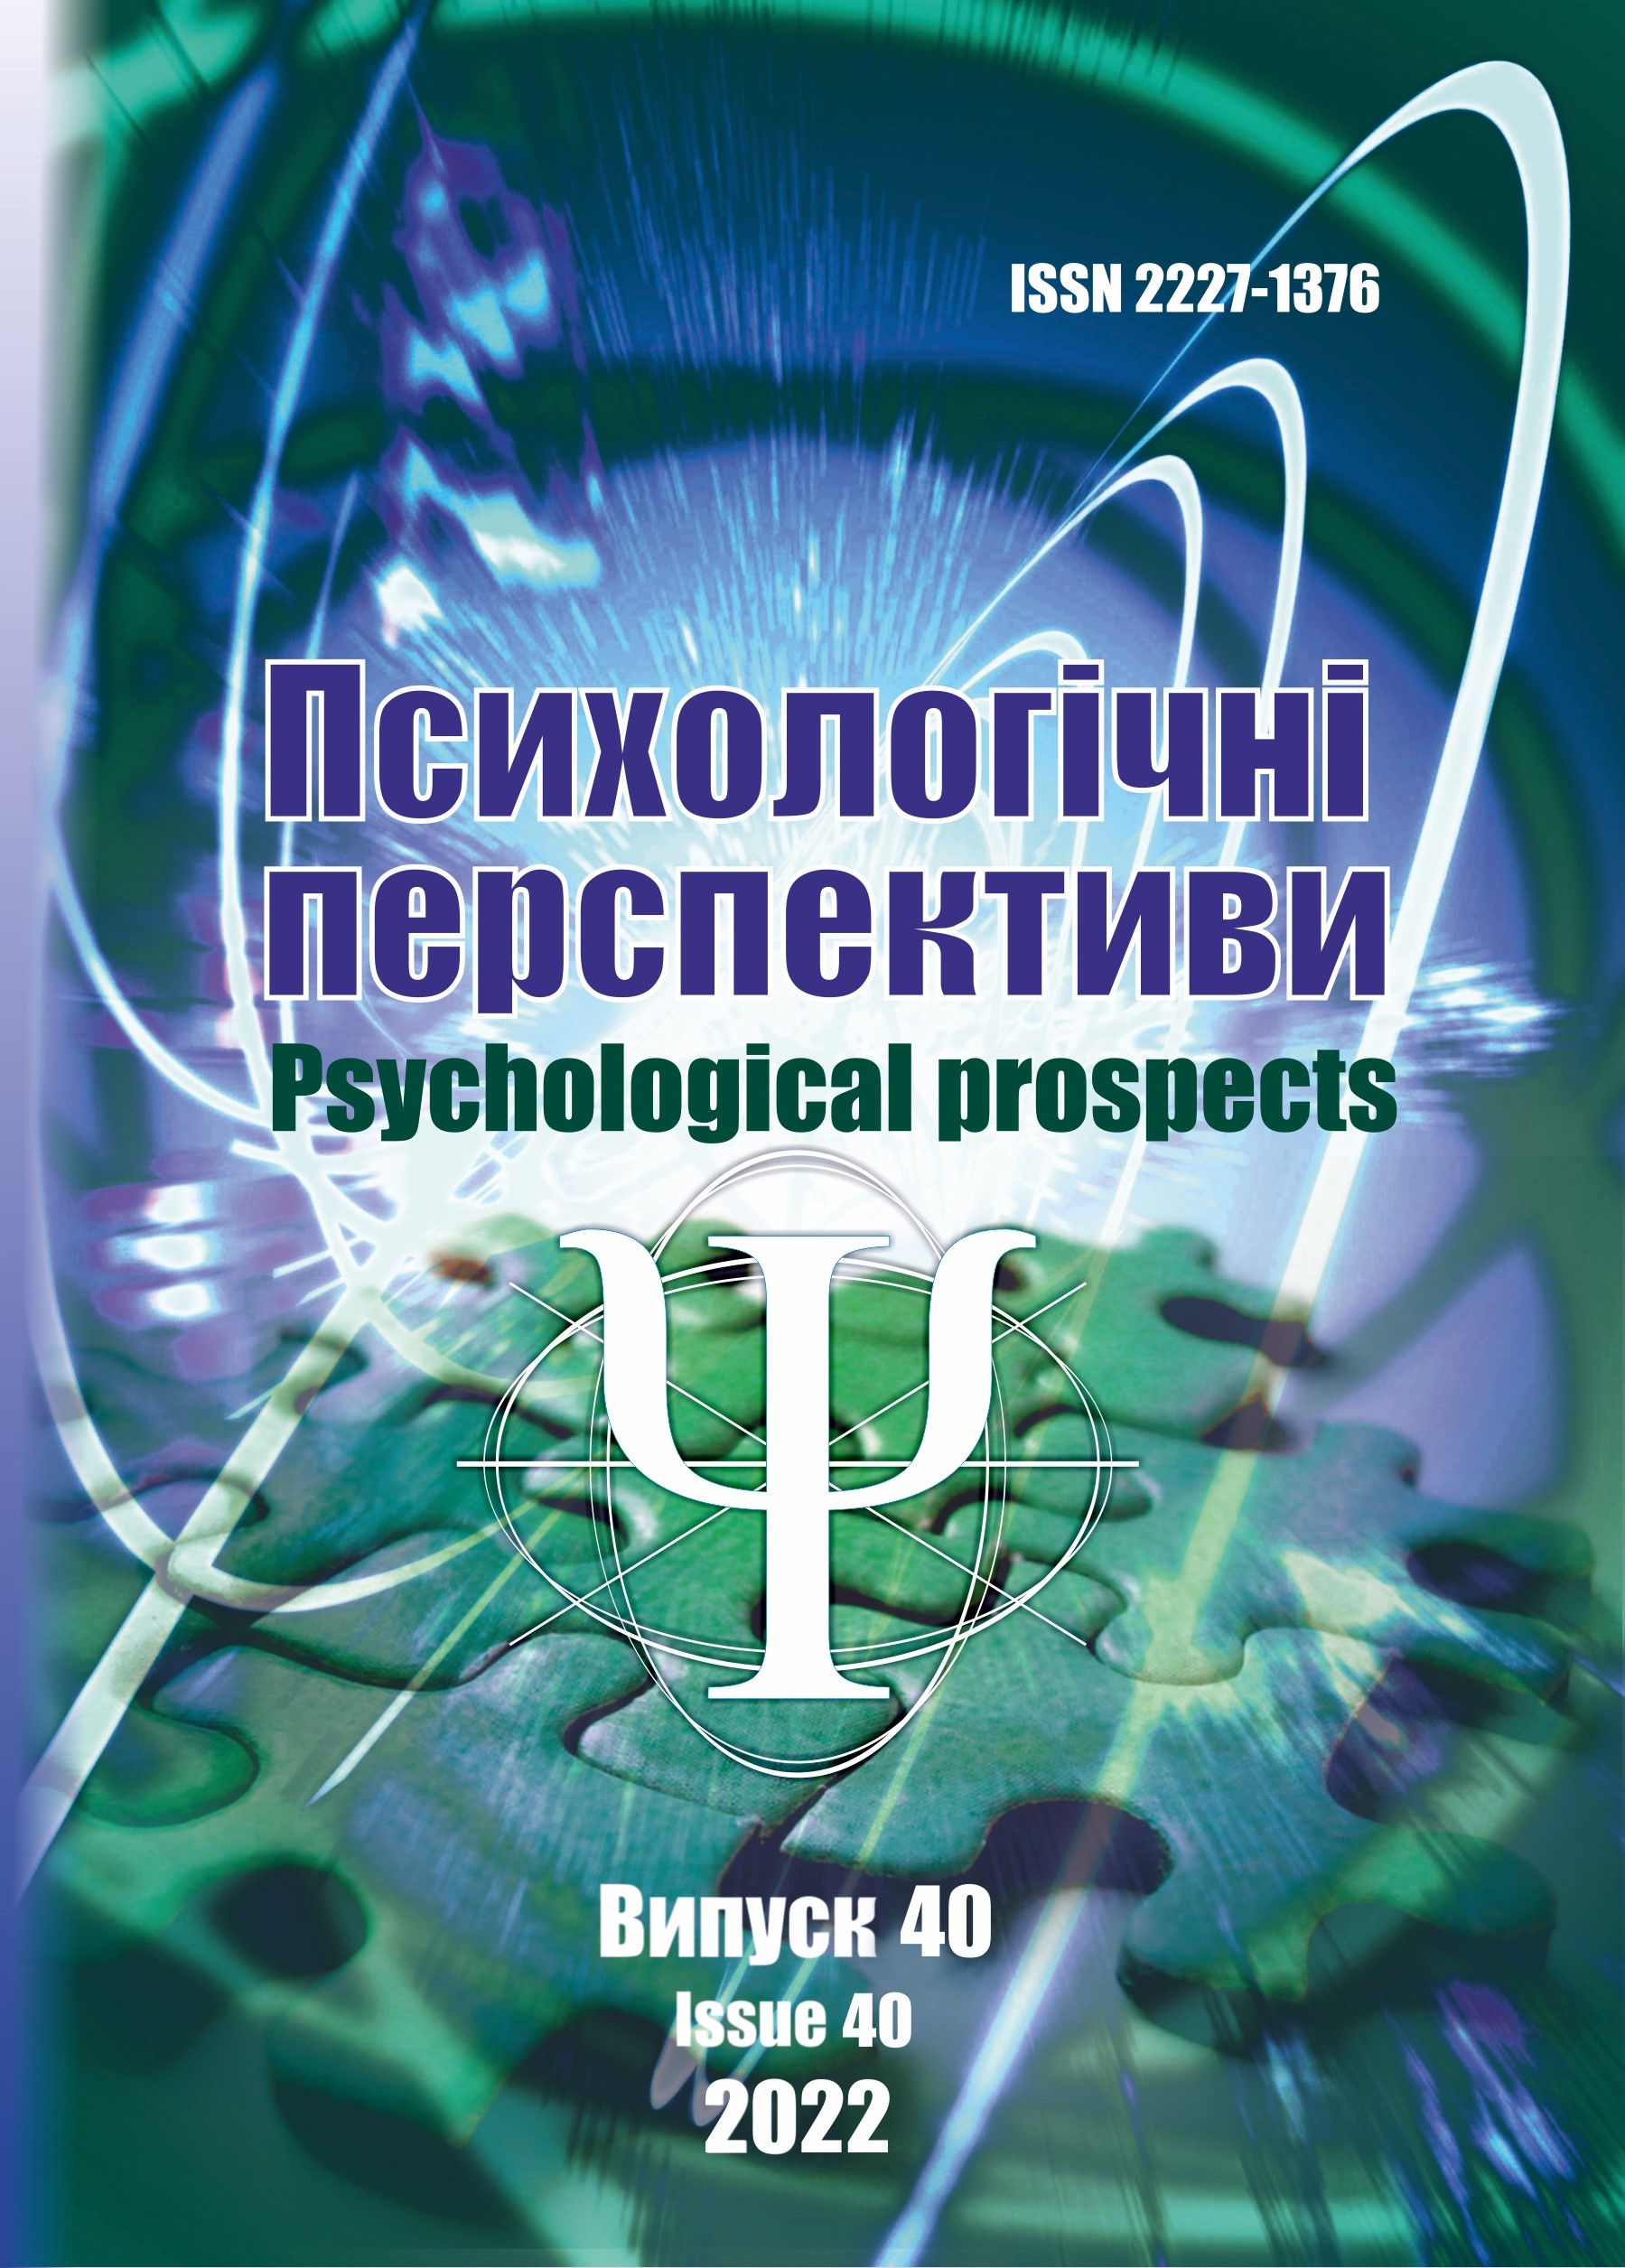 					View No. 40 (2022): Psychological Prospects Journal
				